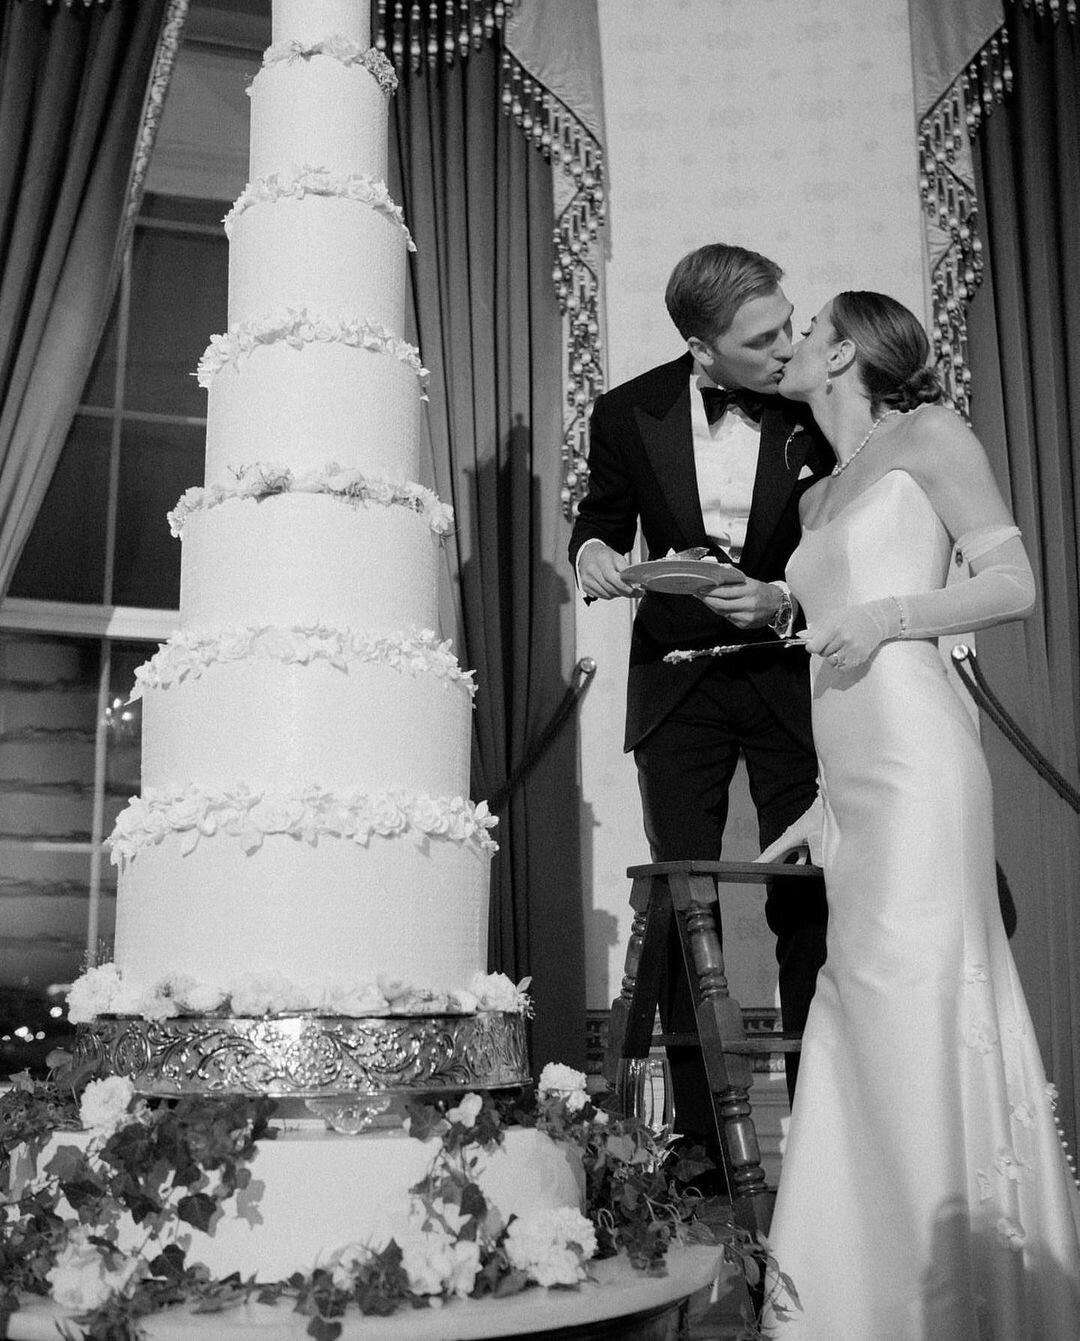 Naomi Biden and Husband Peter Neal Climbed a Ladder to Slice Their Eight-Tier Wedding Cake